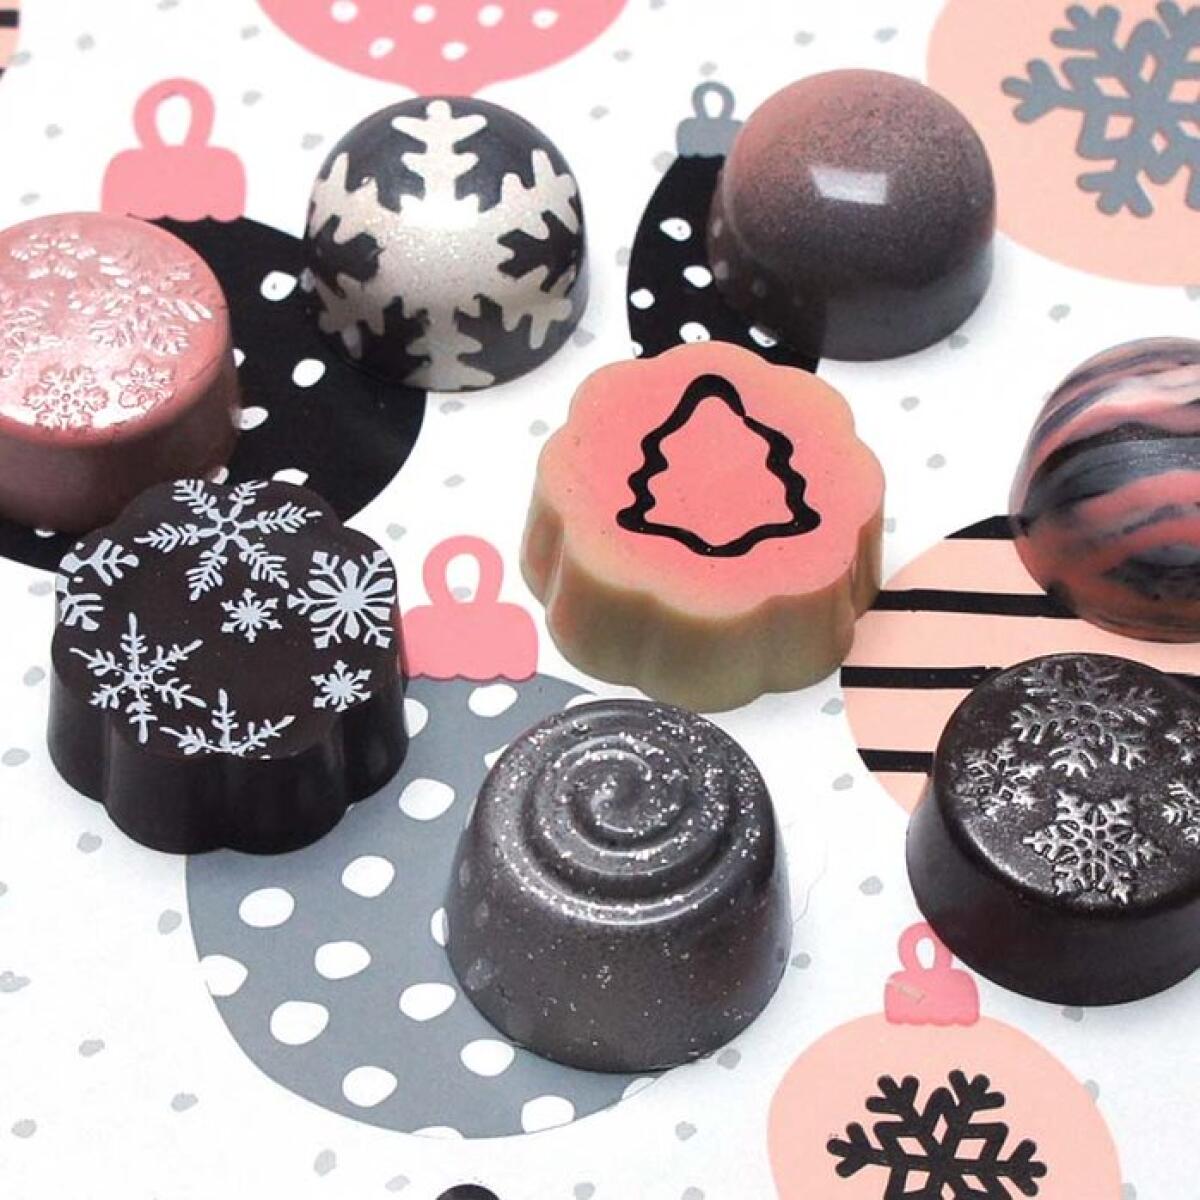 Seasonal bonbons from Sweet Petite Confections at the Little Italy Food Hall.